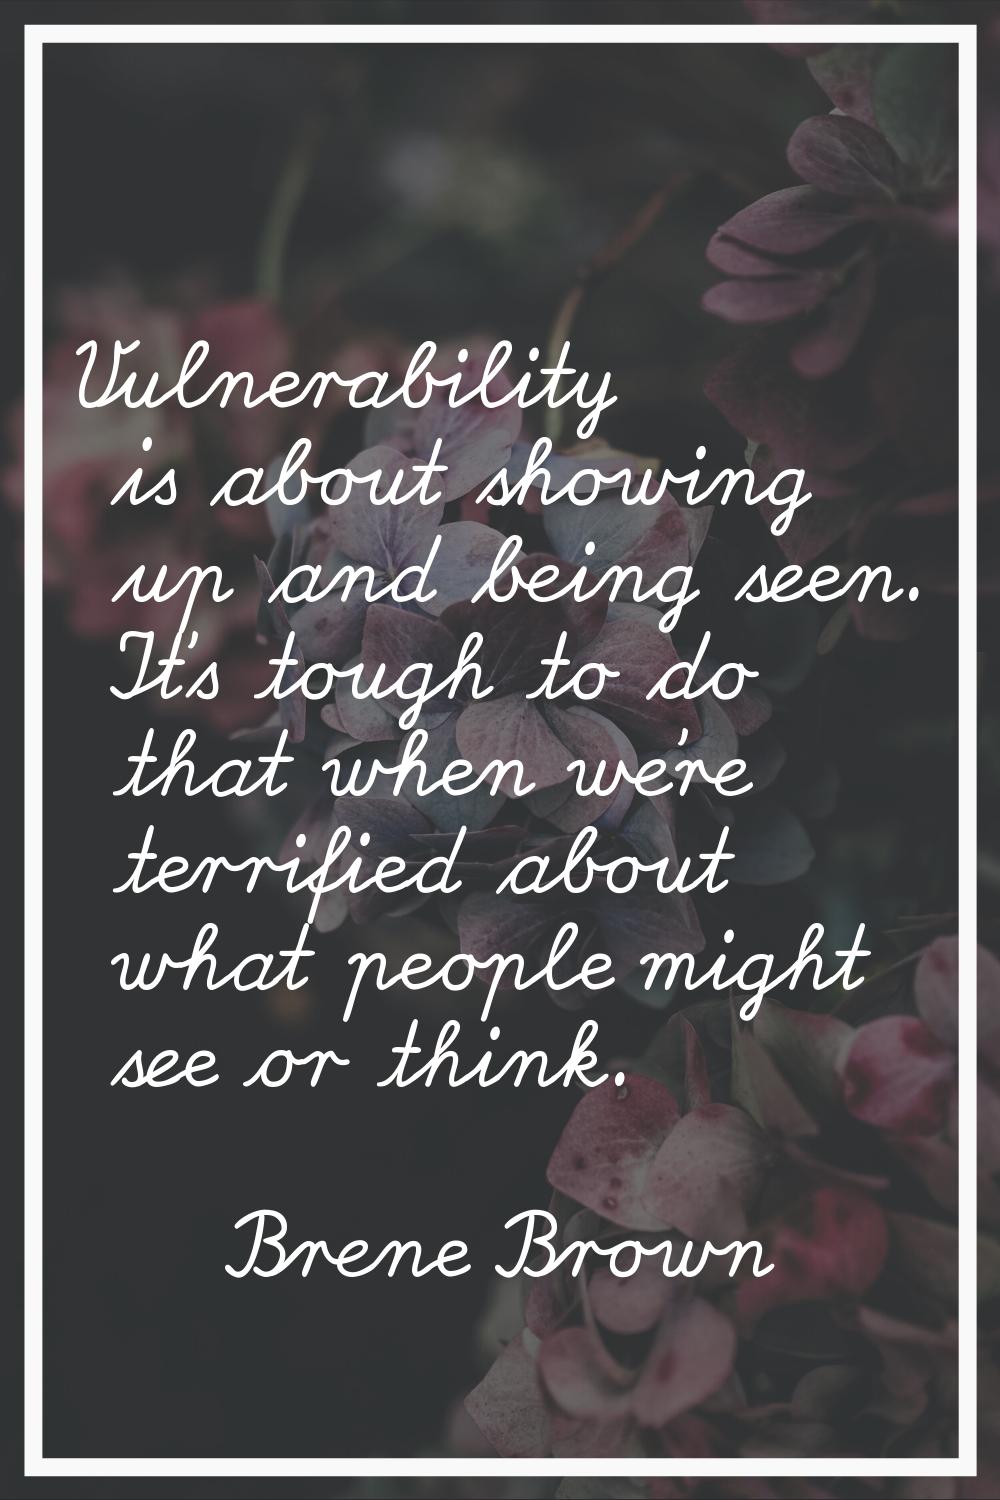 Vulnerability is about showing up and being seen. It's tough to do that when we're terrified about 